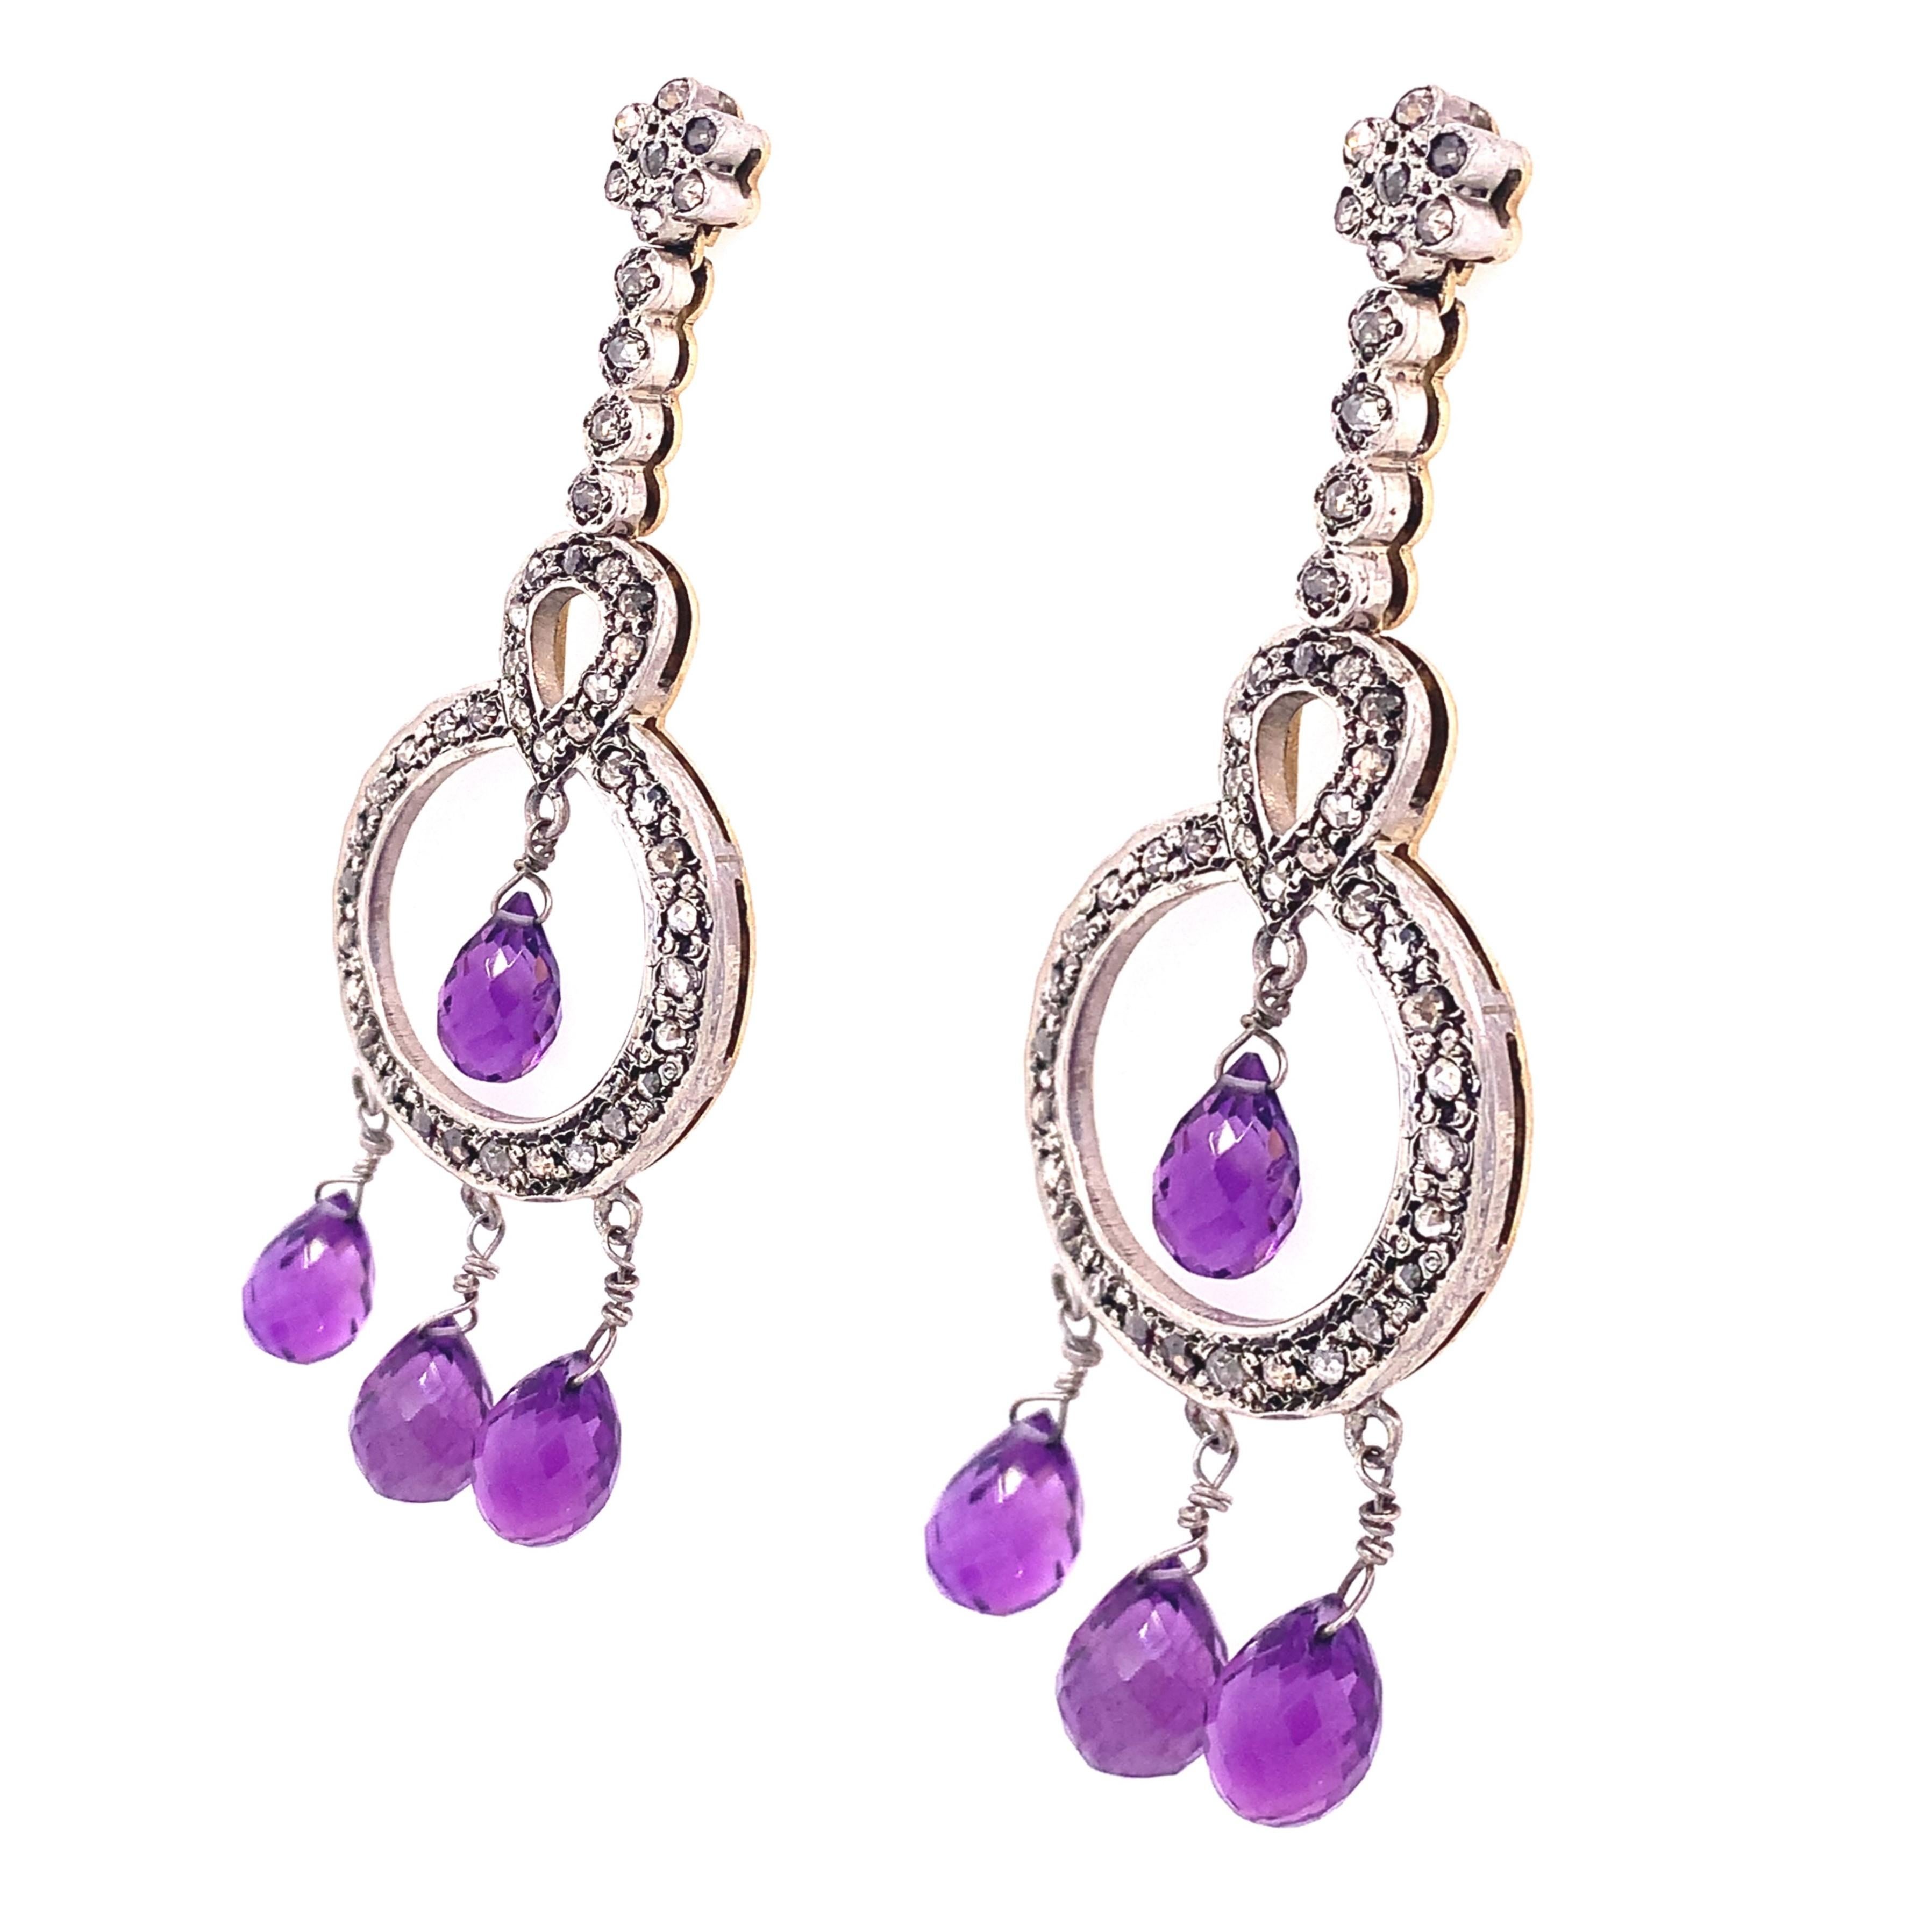 Life in color Collection

This Victorian style silver earrings made of diamonds and Amethyst crystal balls drop moving freely. Set in Sterling Silver and 18K yellow gold.

Amethyst : 6x9 mm , 8x10 mm approximately.